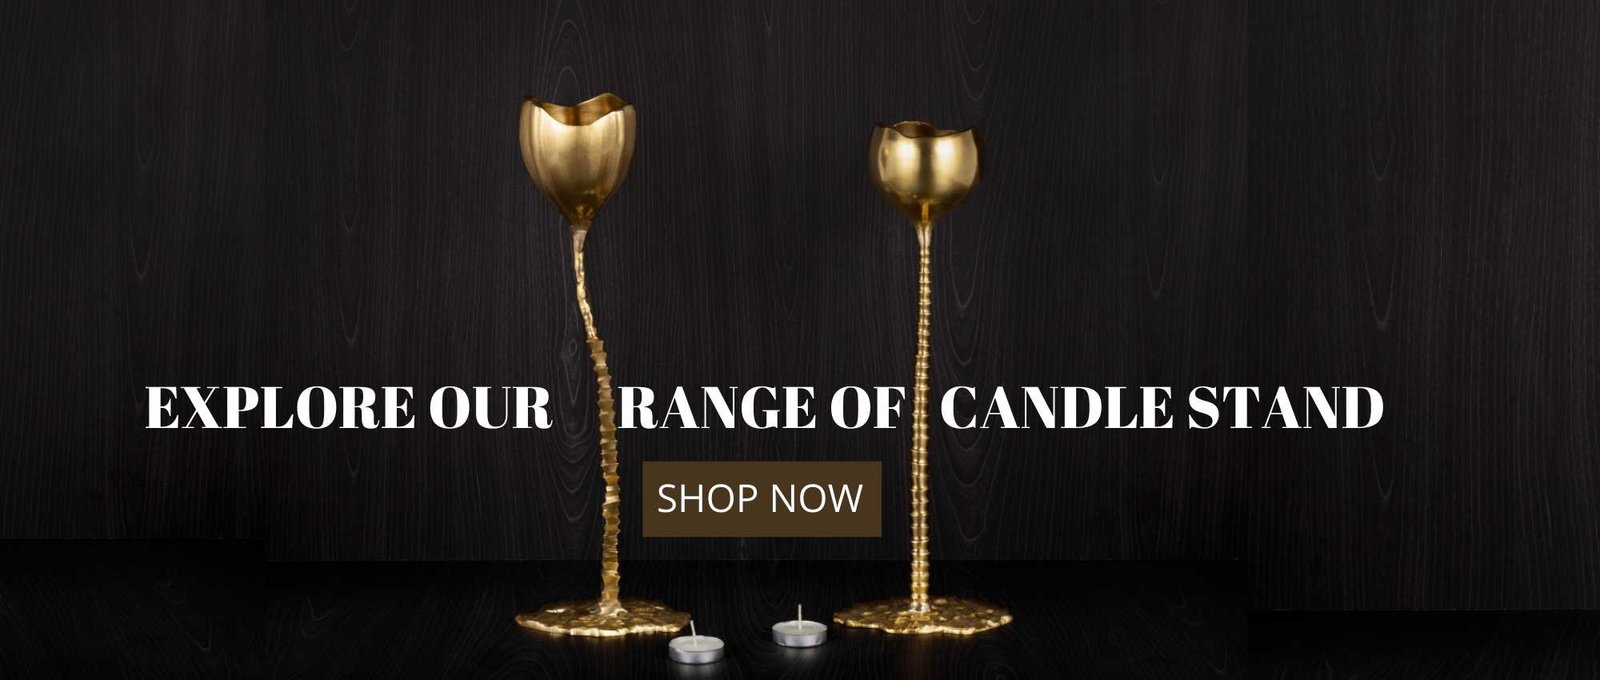 EXPLORE-OUR-RANGE-OF-CANDLE-STAND